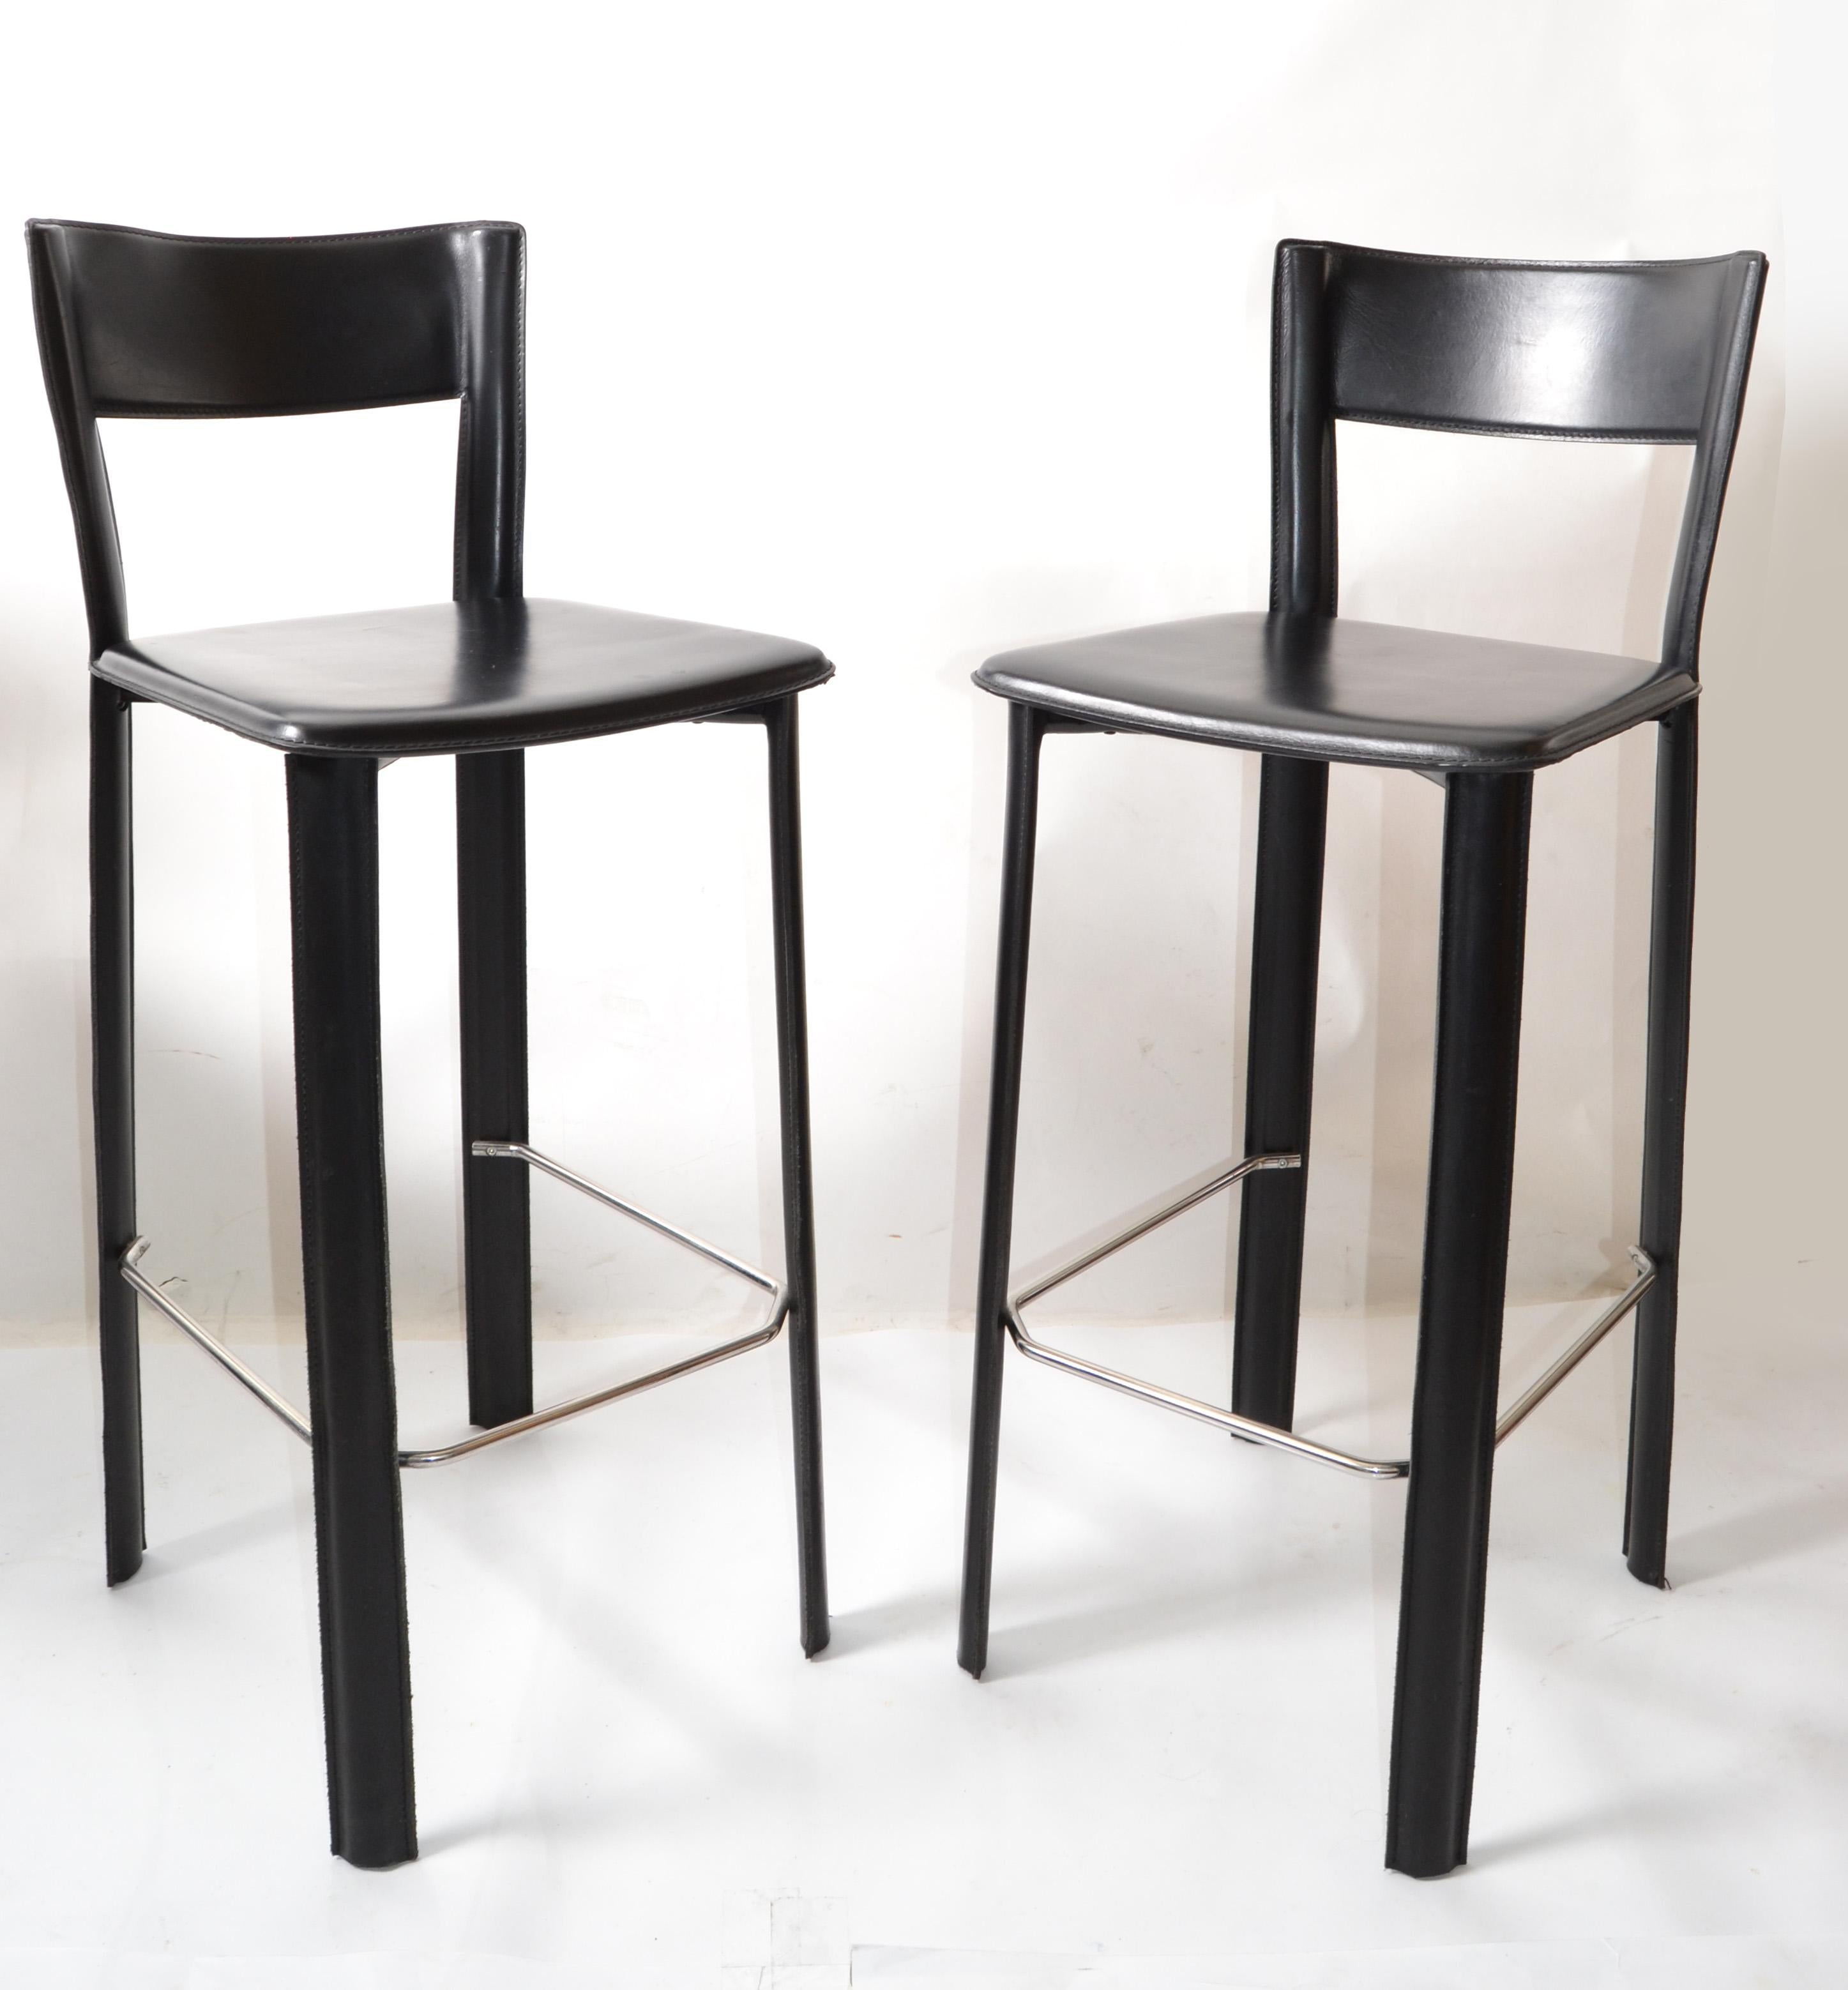 Modern Set of 3 Italian Hand Stitched Frag Black Leather Chrome Bar Stools Contemporary